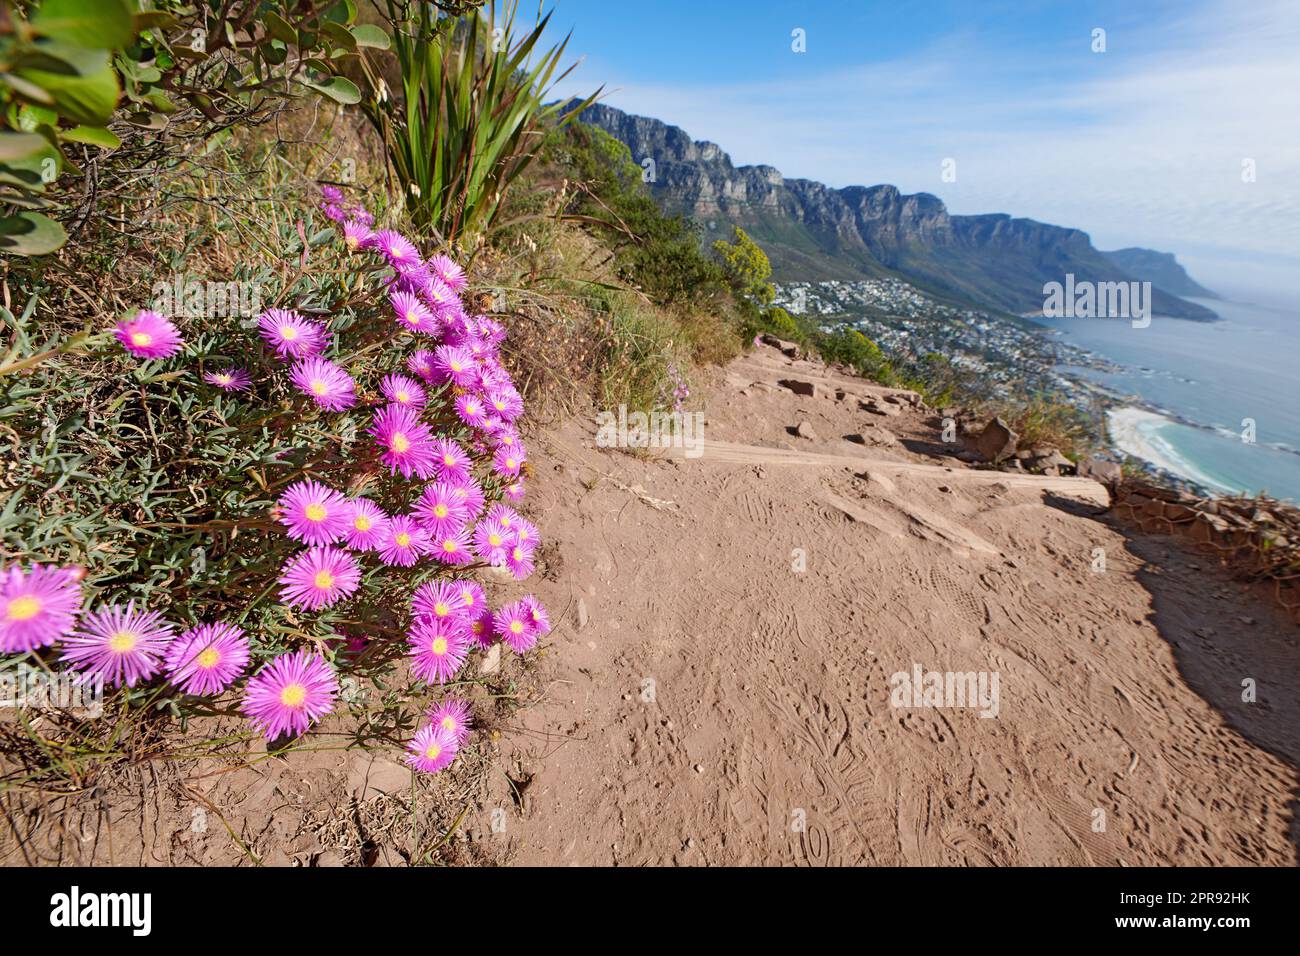 Rugged landscape of lampranthus spectabilis flowers growing on a cliff by the sea with hiking trails to explore. Copy space with scenic coast and mountain slope with a cloudy blue sky background Stock Photo